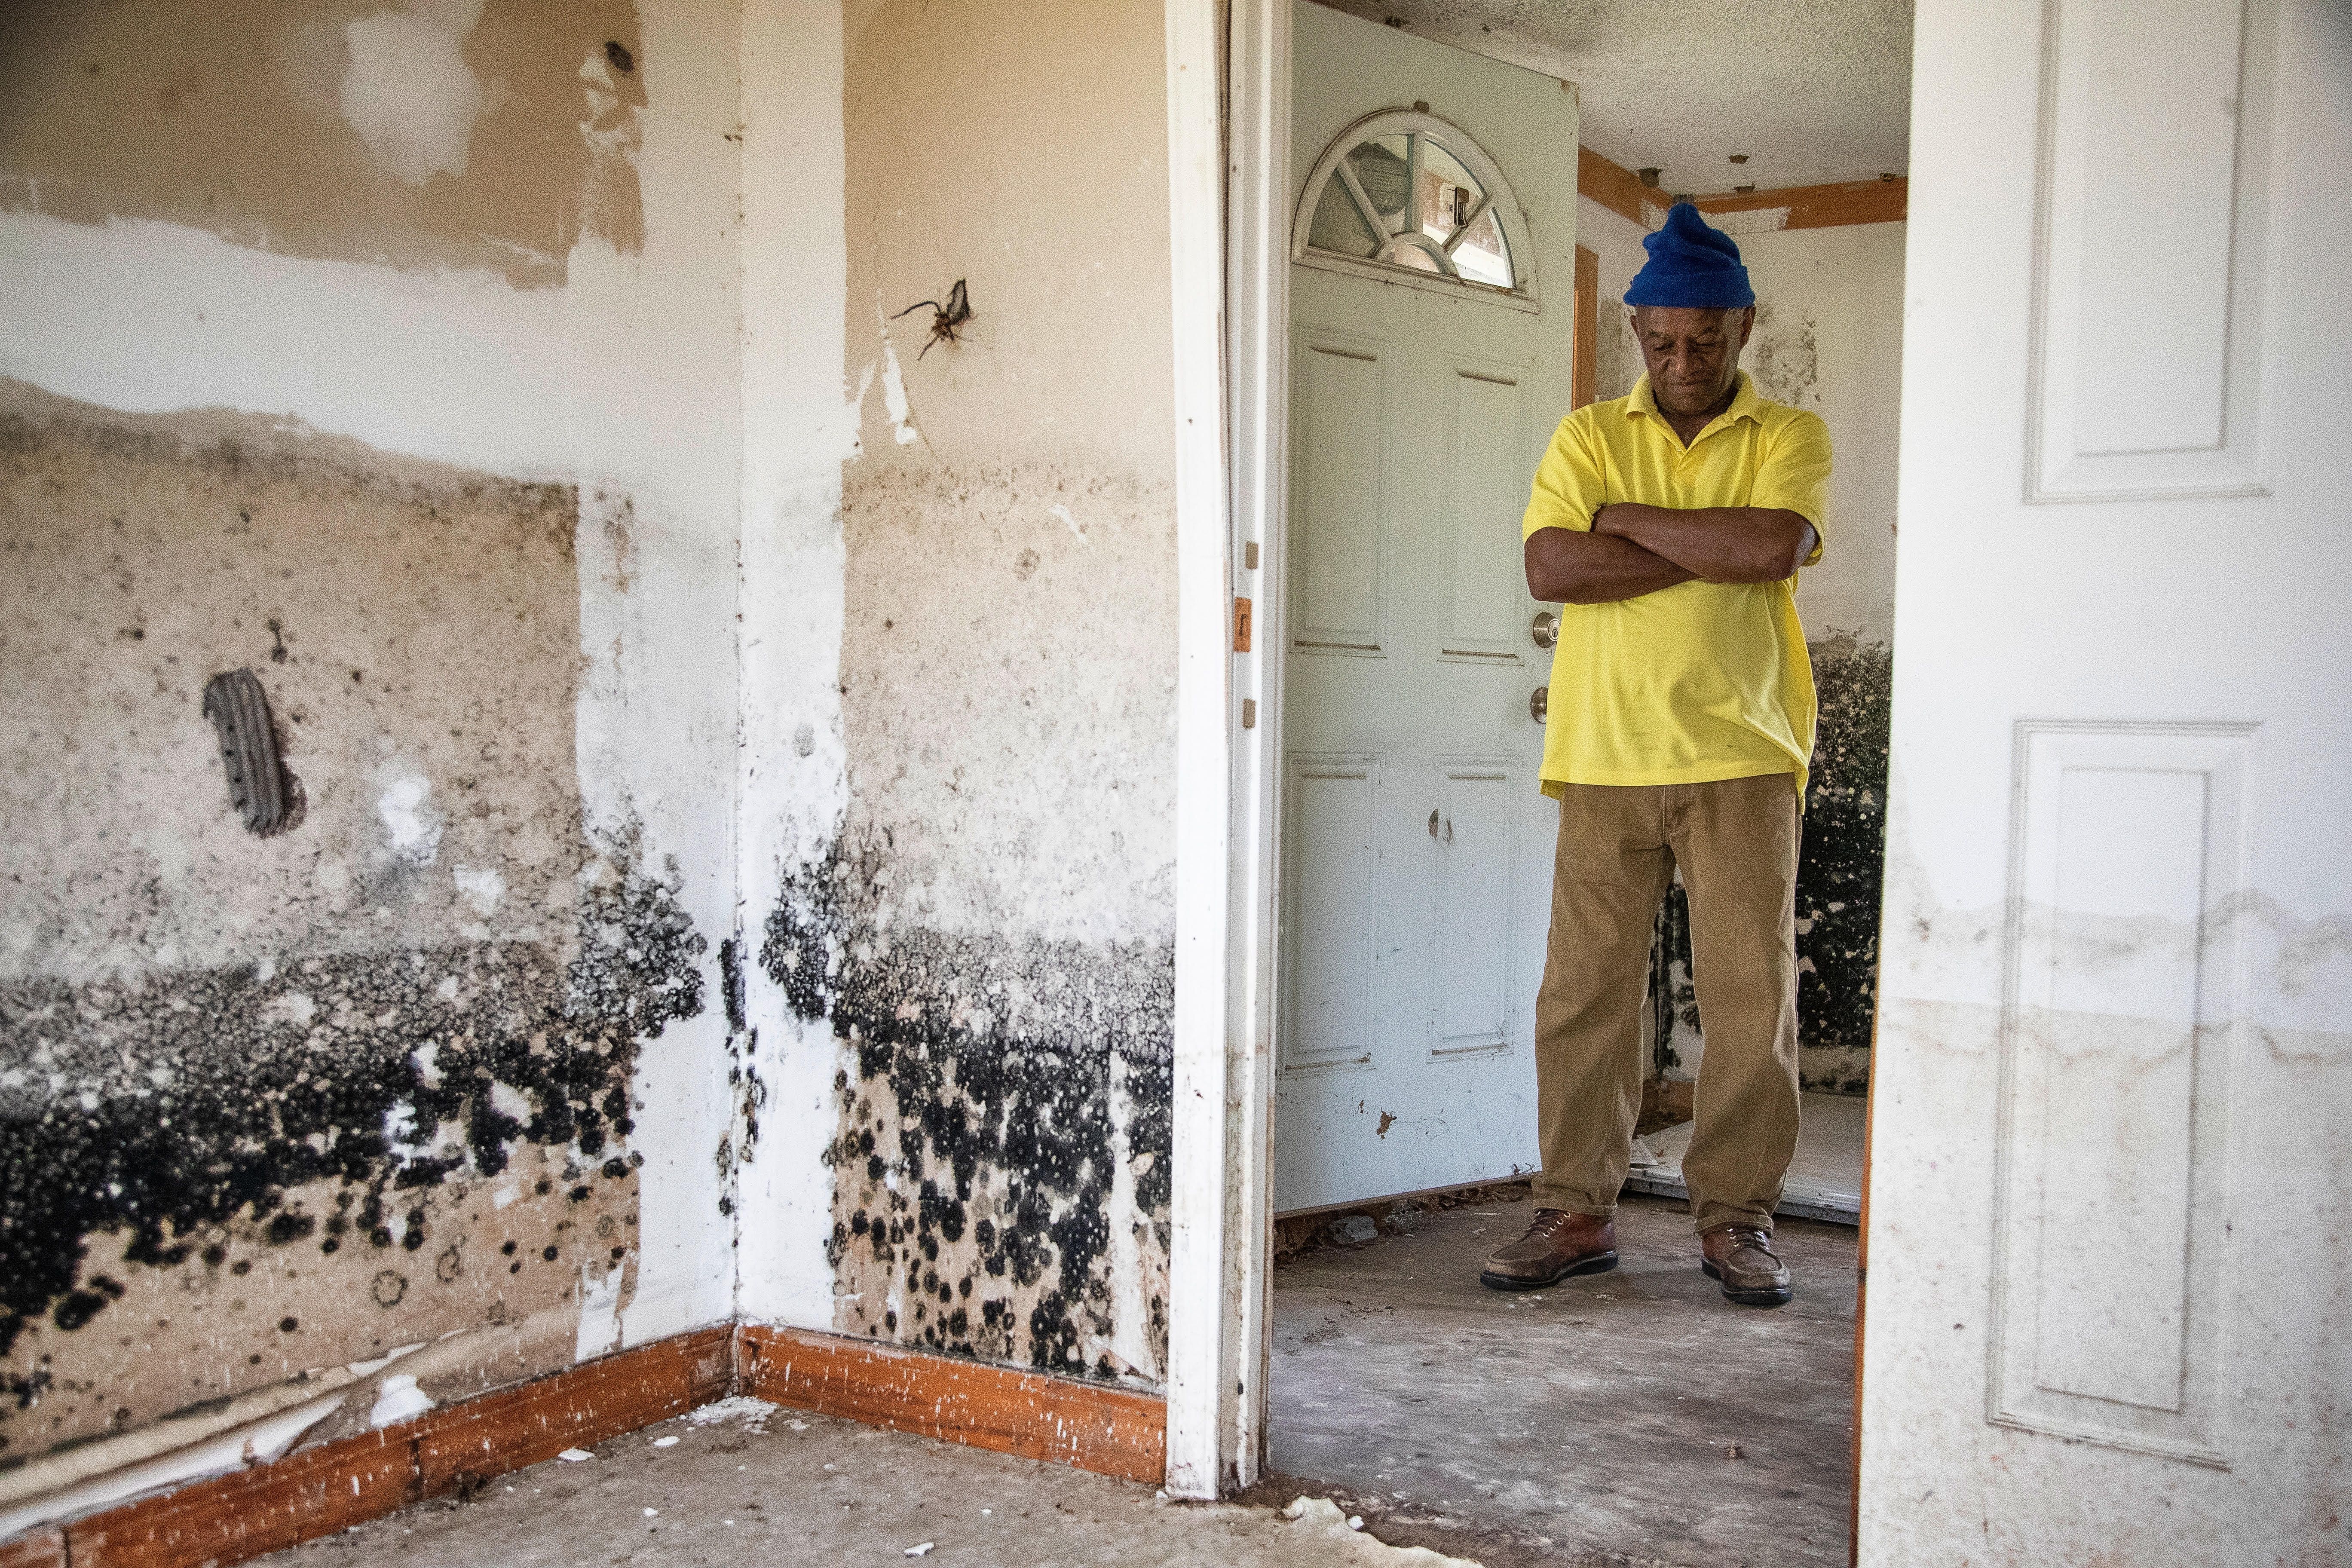 While many homeowners across Sellers, South Carolina, have received help from FEMA and other natural disaster response agencies, those without a clear title for their home have been left with no government help in mold saturated homes. Image by Joshua Boucher. United States, 2020.